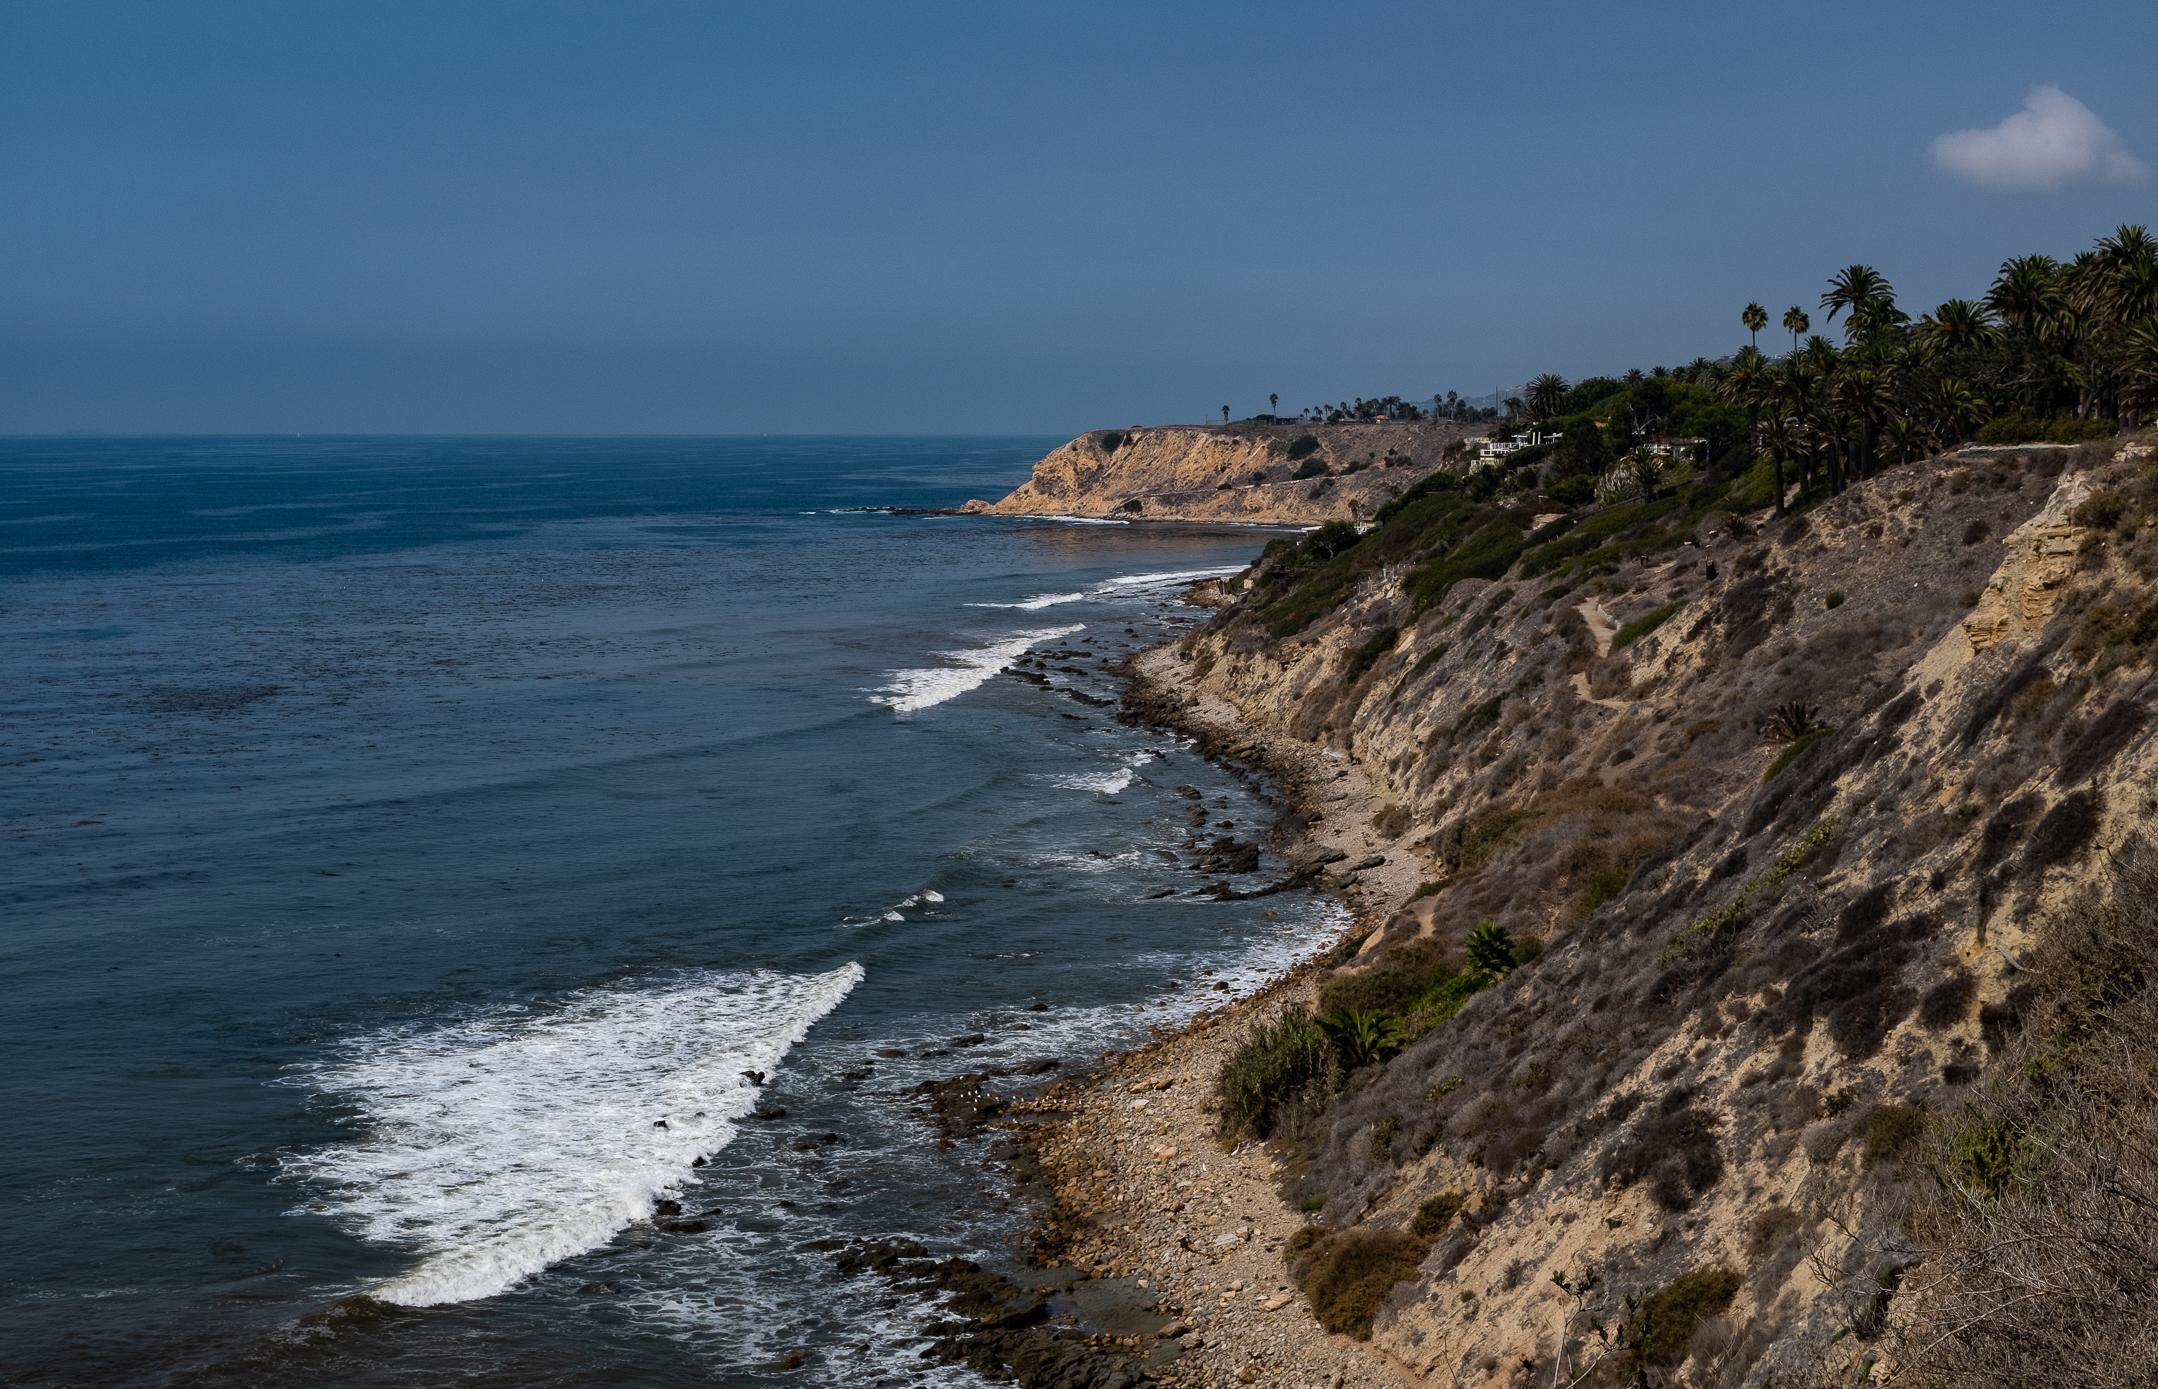 One Dies When SUV Goes Over Cliff in Rancho Palos Verdes